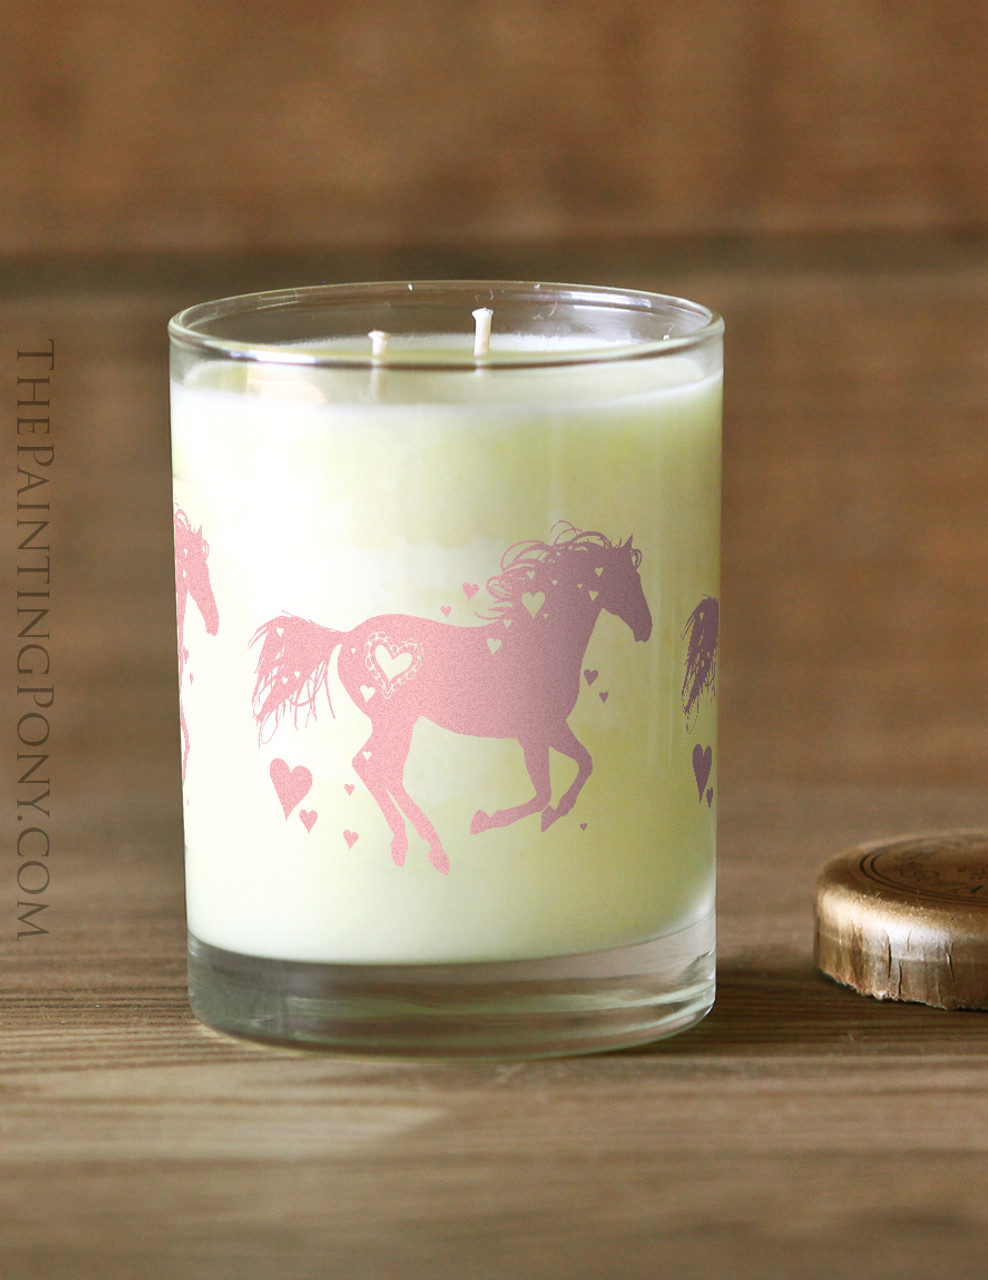 https://cdn11.bigcommerce.com/s-dthur0g/images/stencil/1280x1280/products/4824/23026/Heart_Horse_Collectible_Equestrian_Cup_Candle__72151.1704117066.jpg?c=2